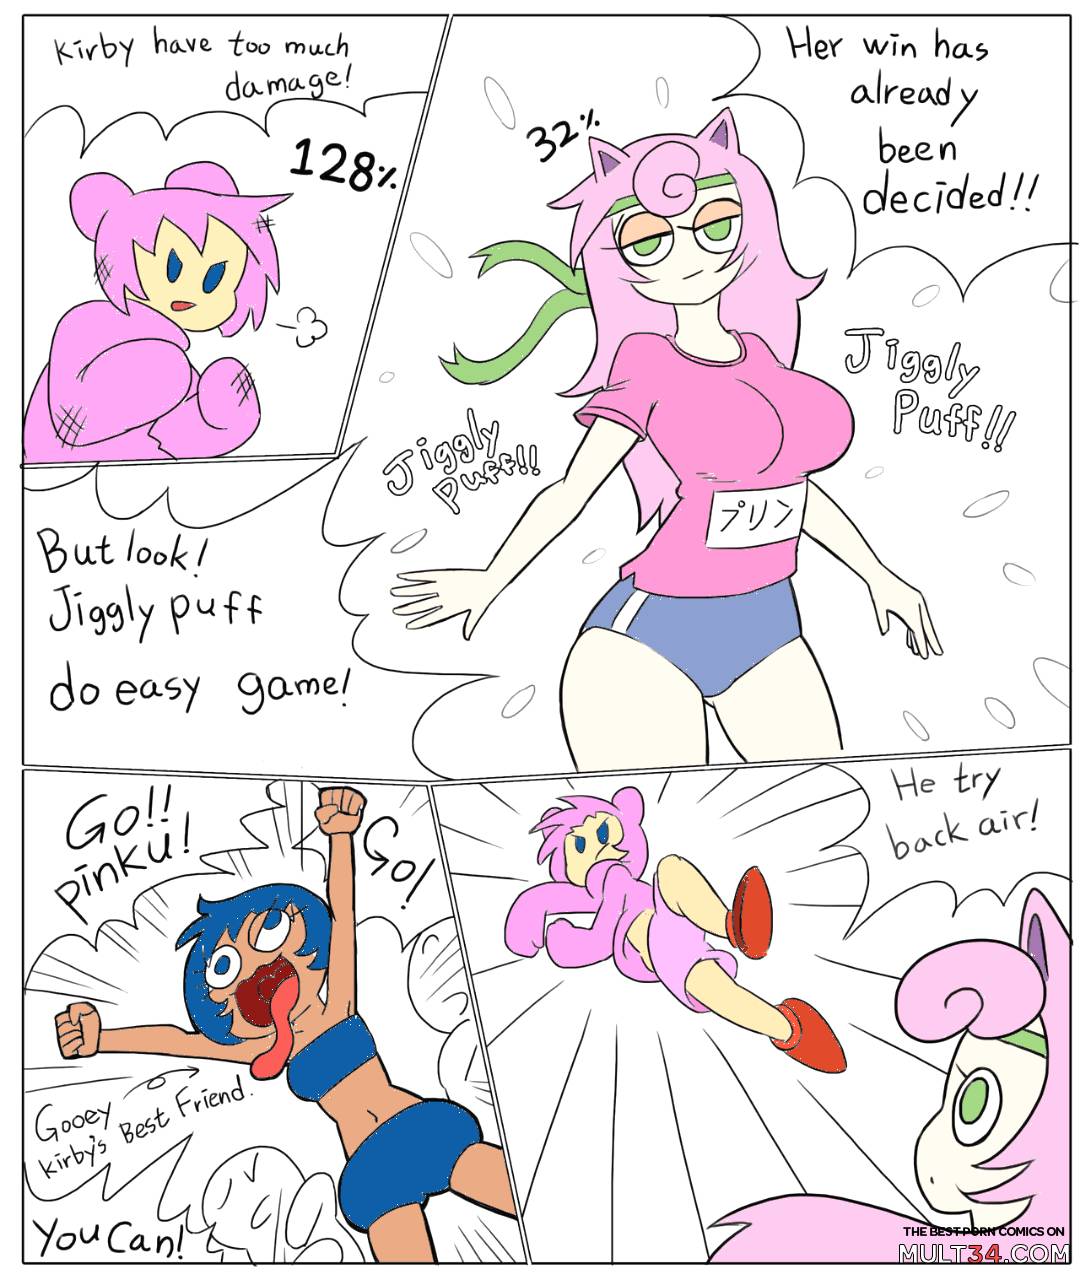 Kirby vs Jigglypuff (somewhat colorized. . .) page 2